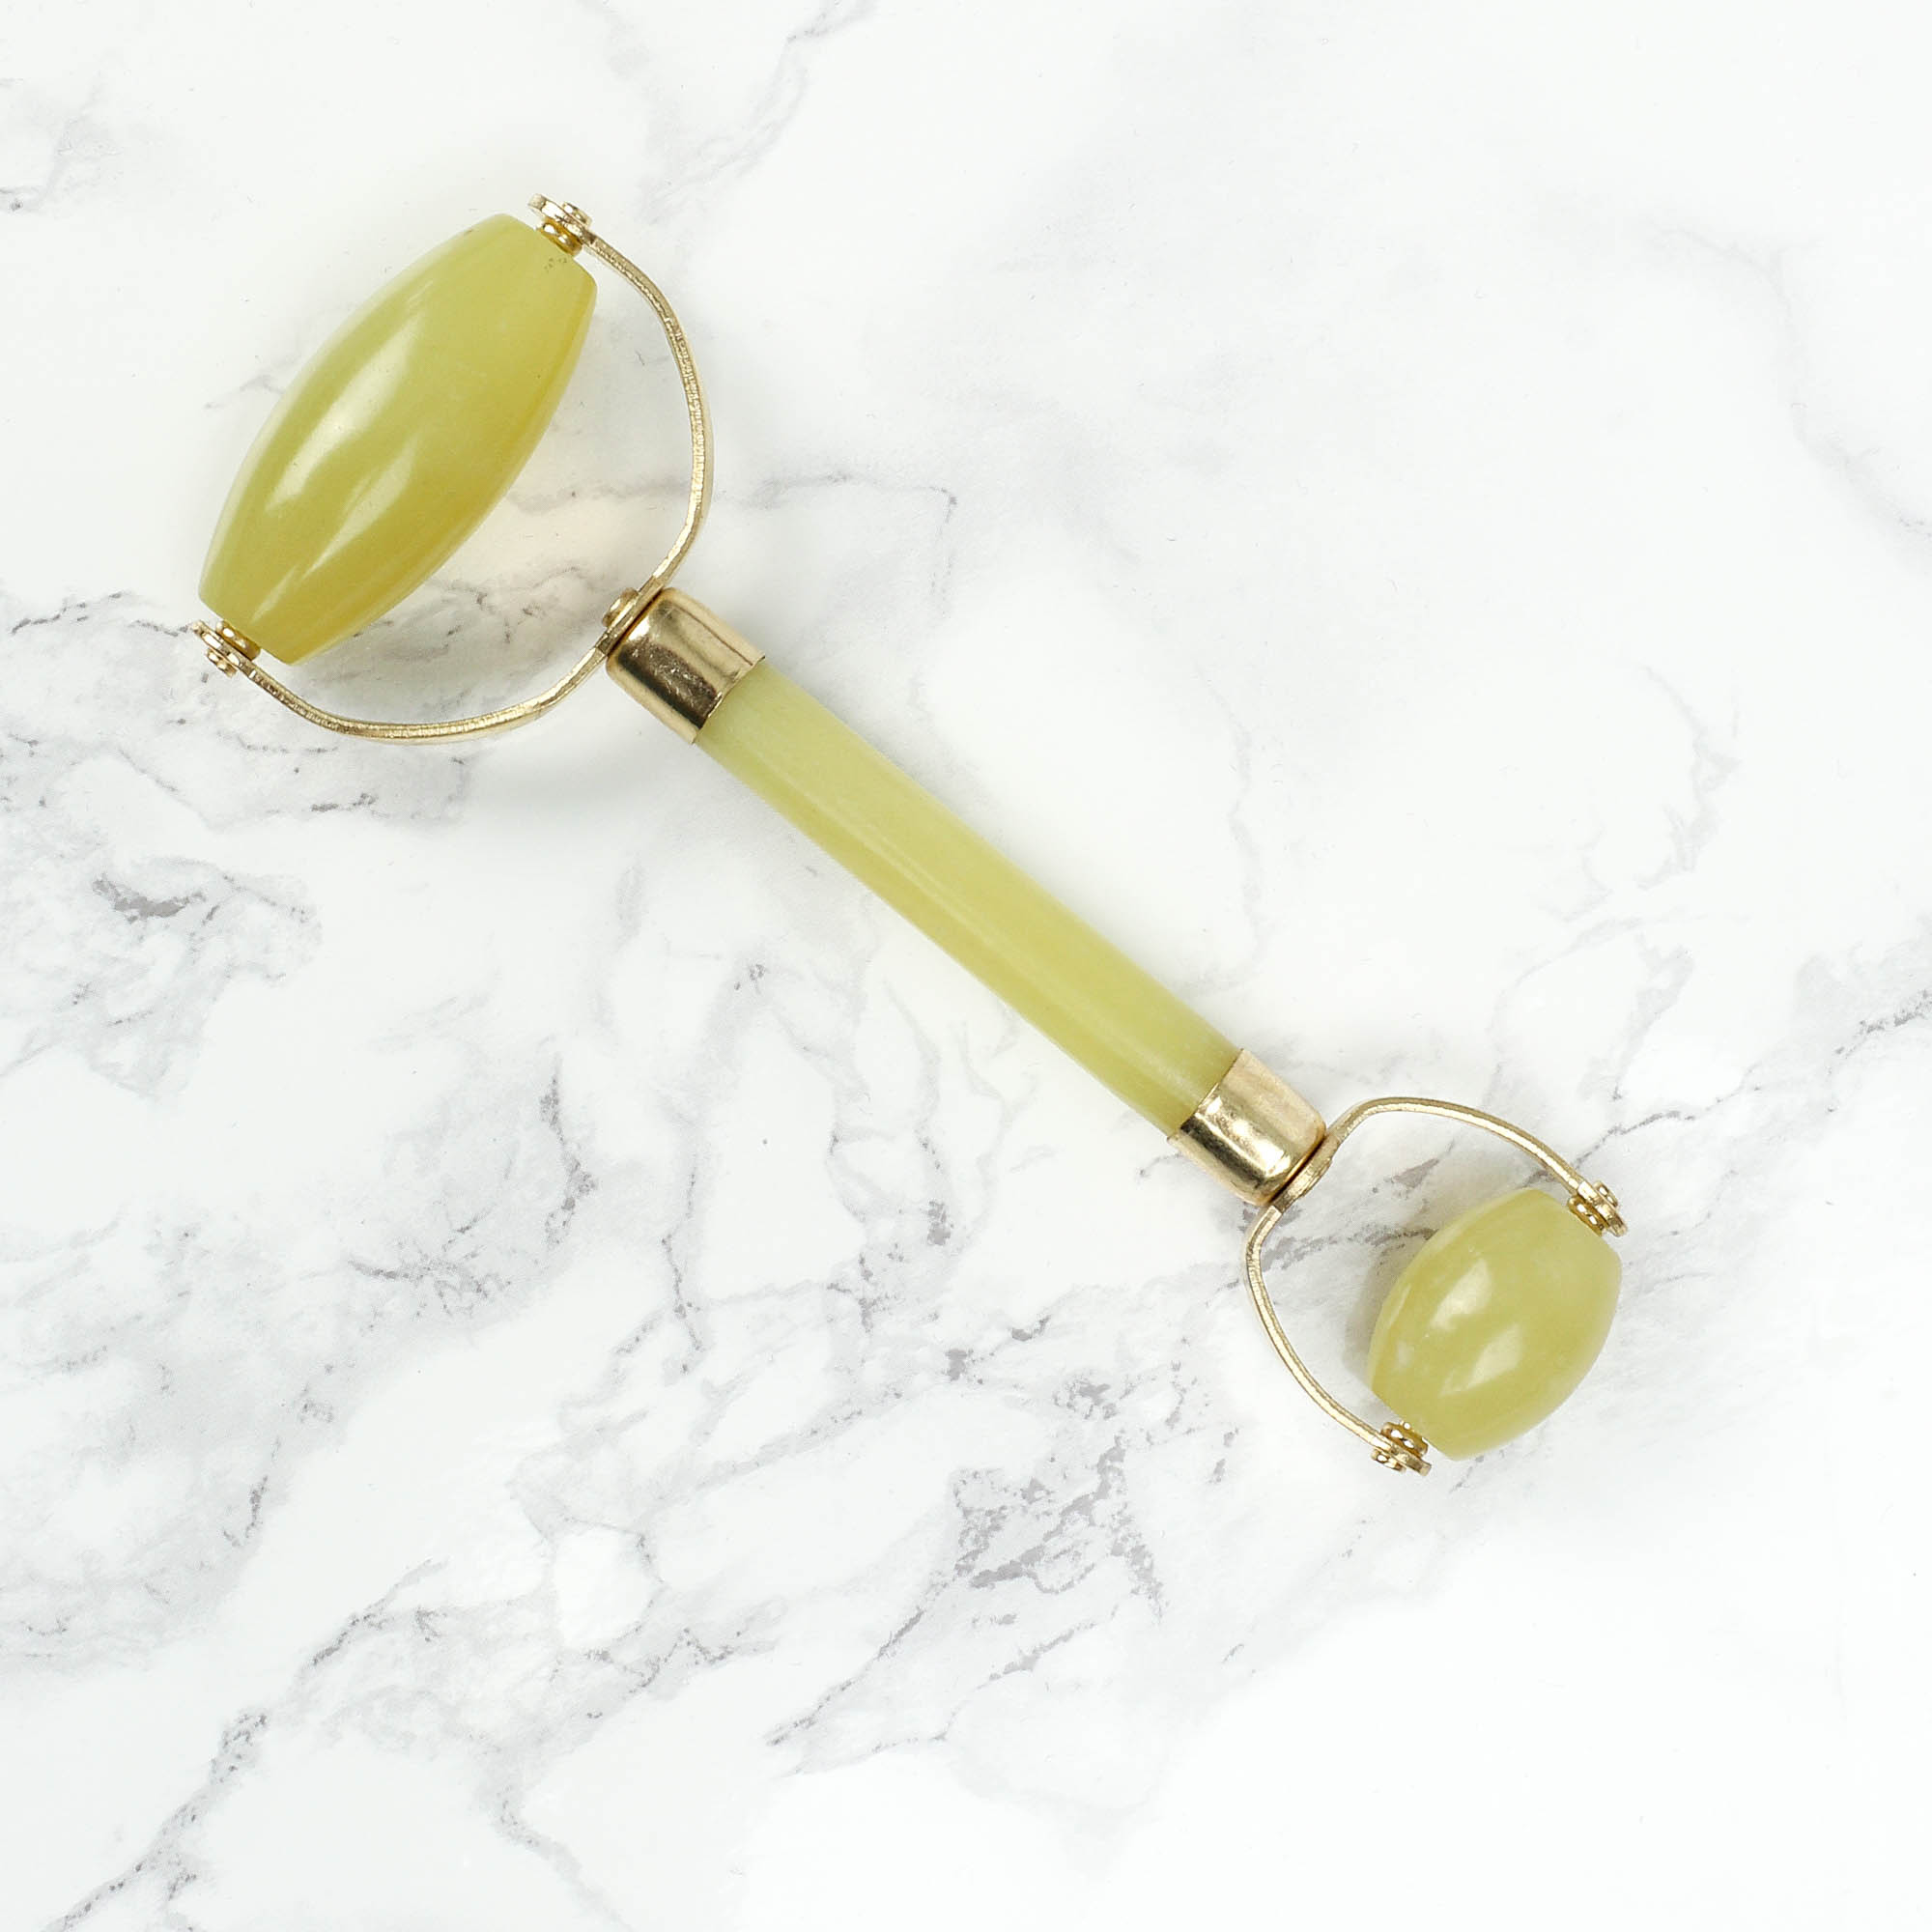 Double Headed Jade Roller - Natural Chemical Free Crystal in a Signature Silk Lined Box